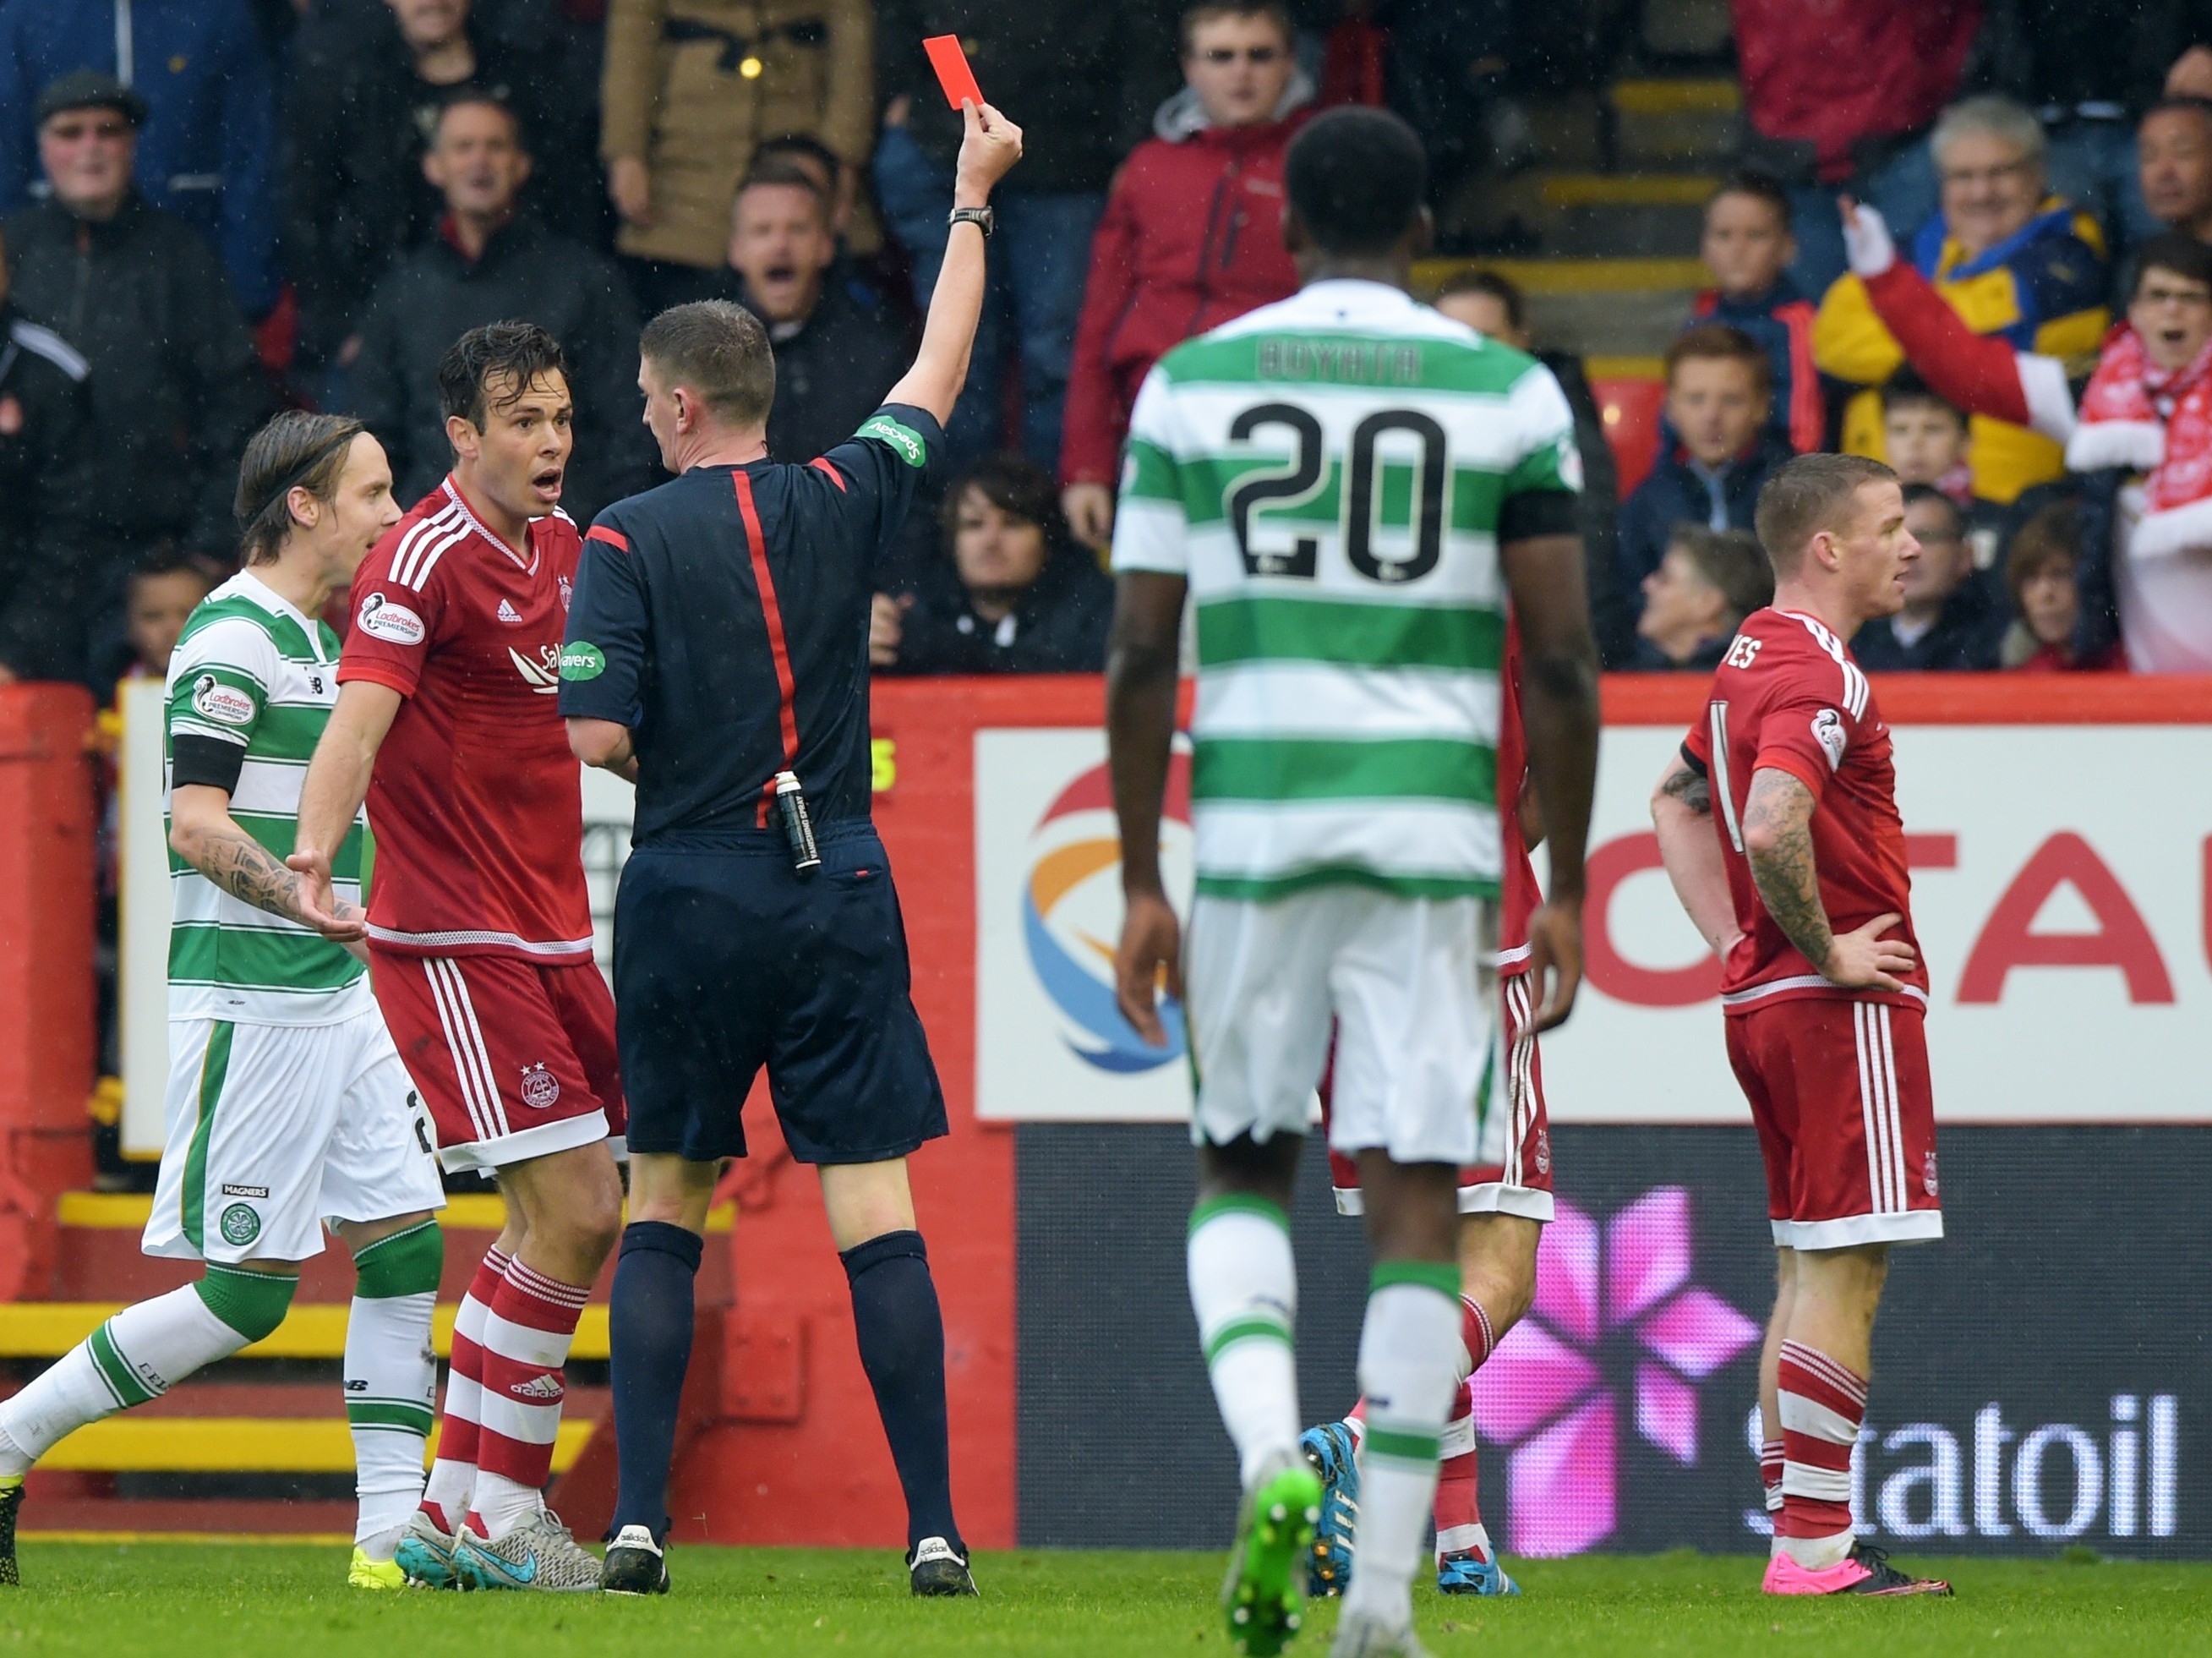 Hayes will return from suspension today following his red card against Celtic 